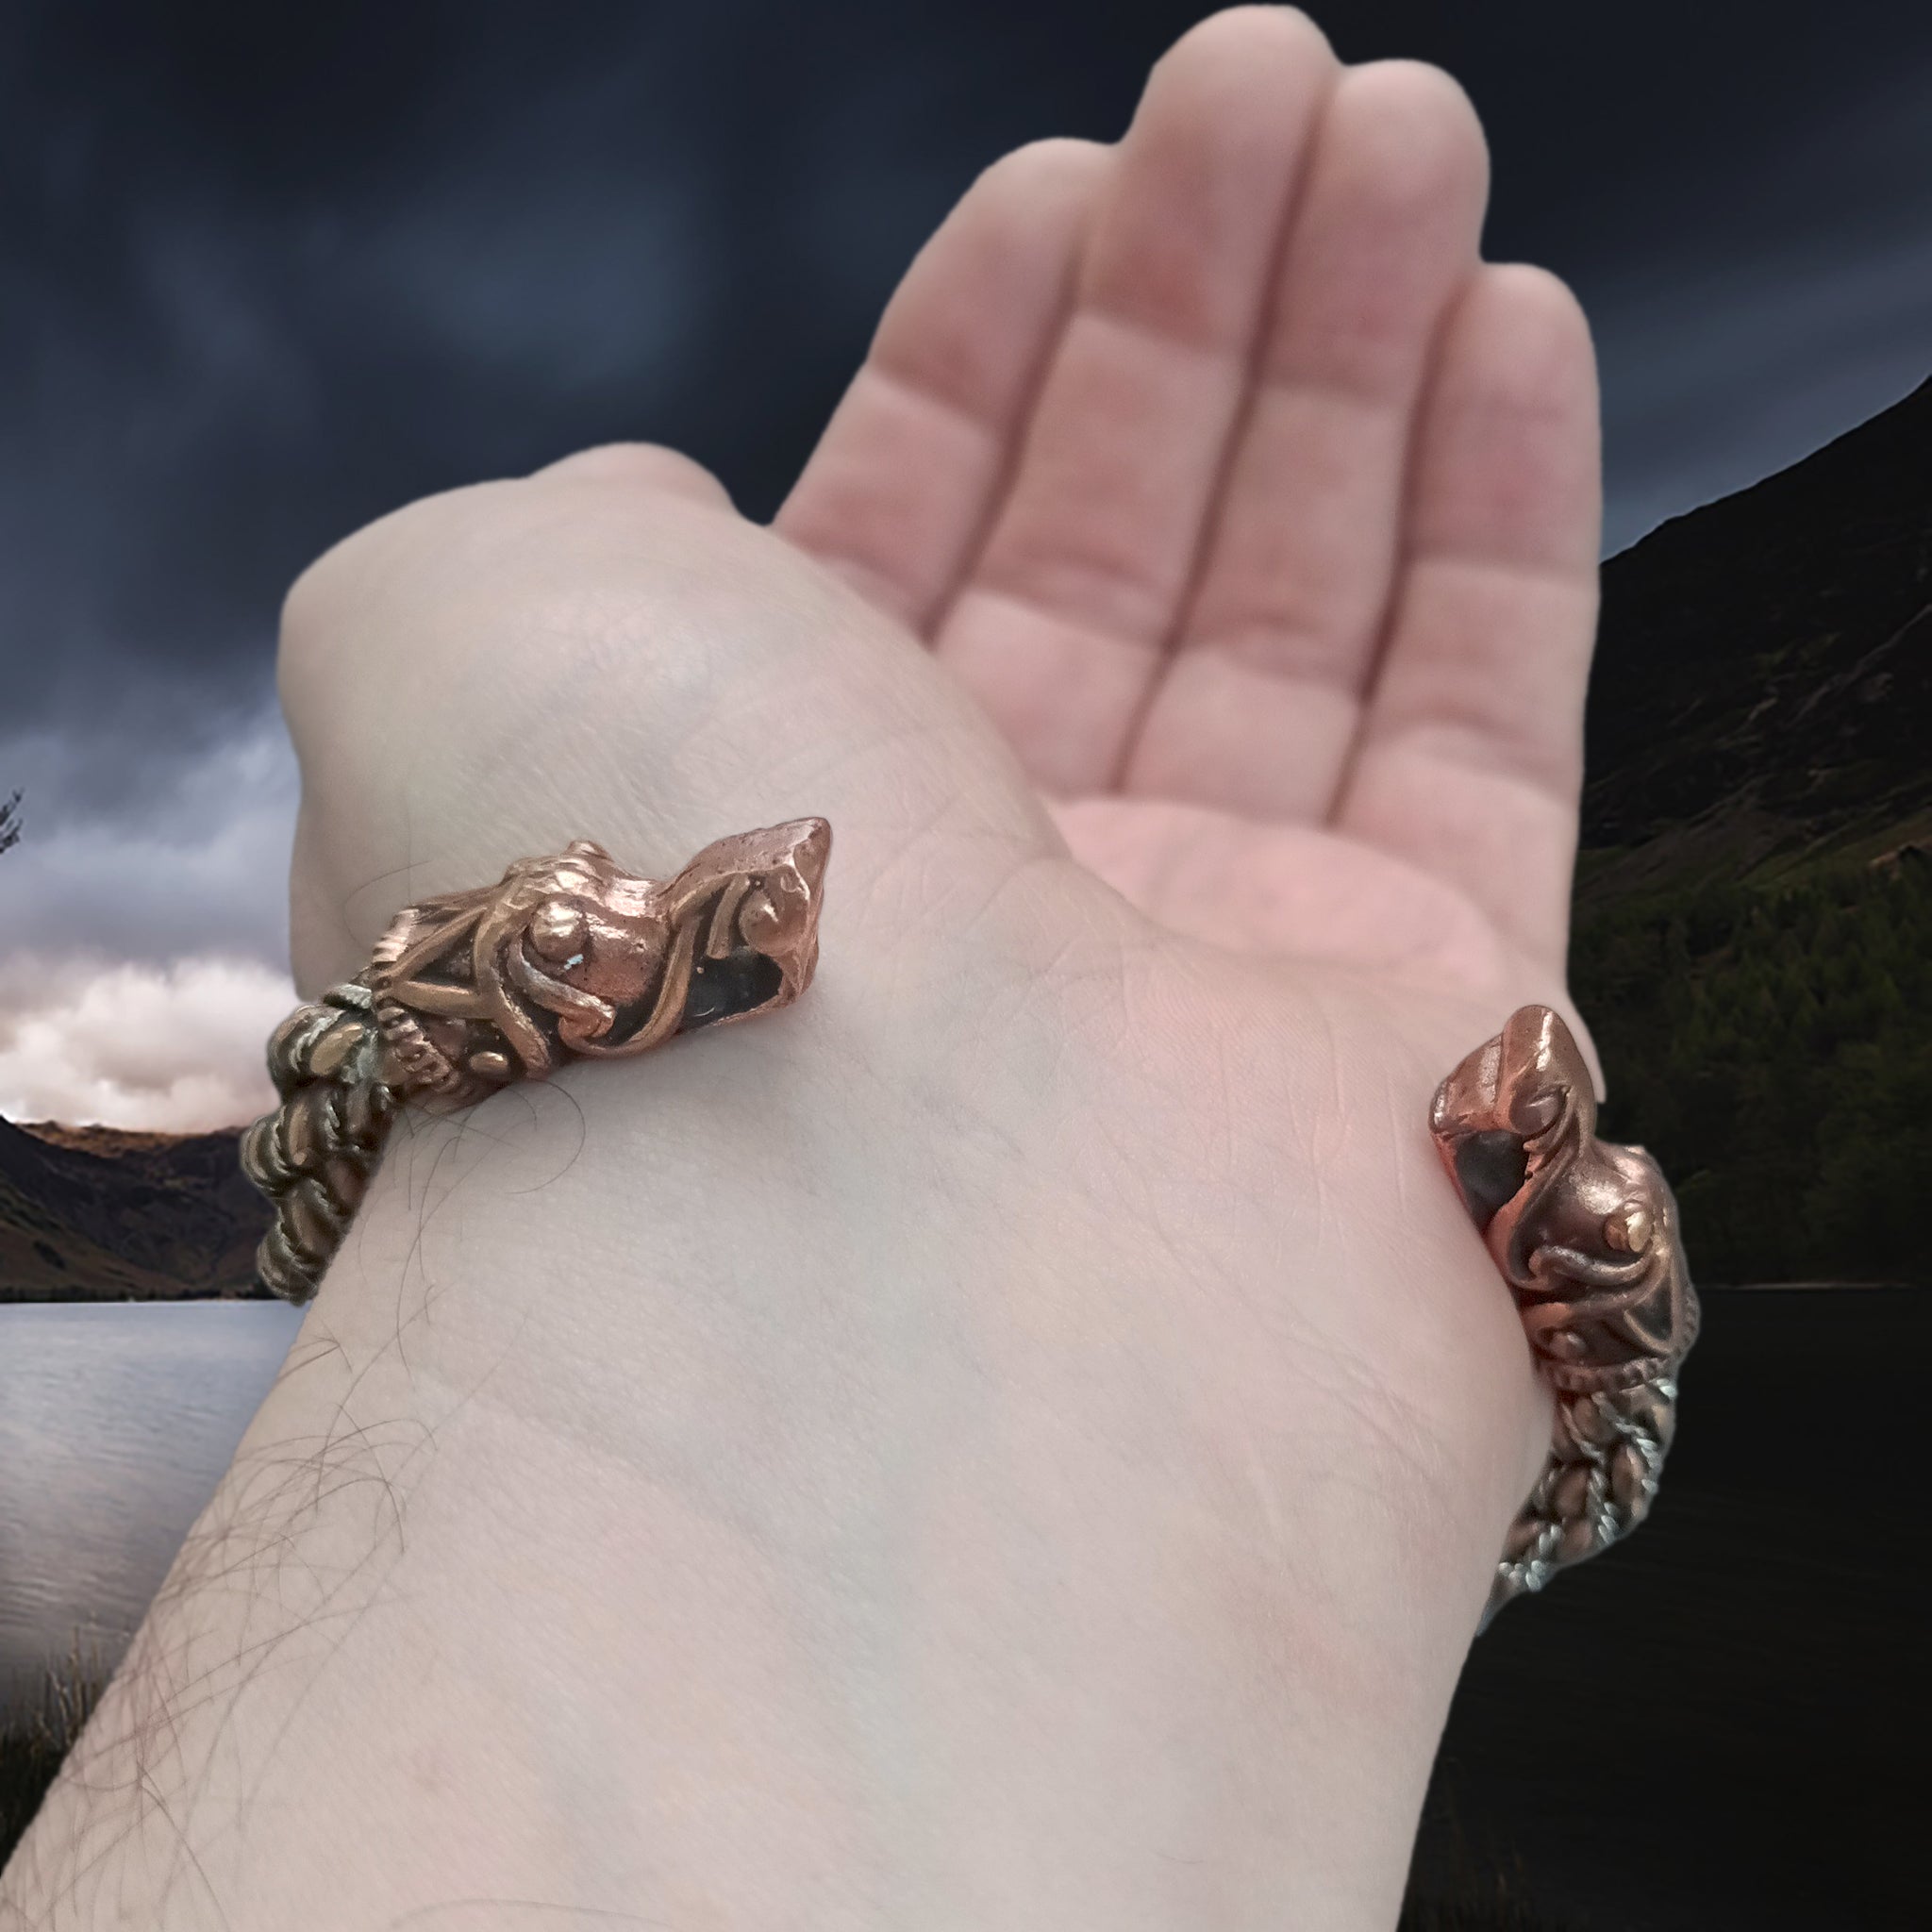 Handmade Twisted Bronze and Silver Arm Ring / Bracelet With Gotlandic Dragon Heads on Back of Wrist